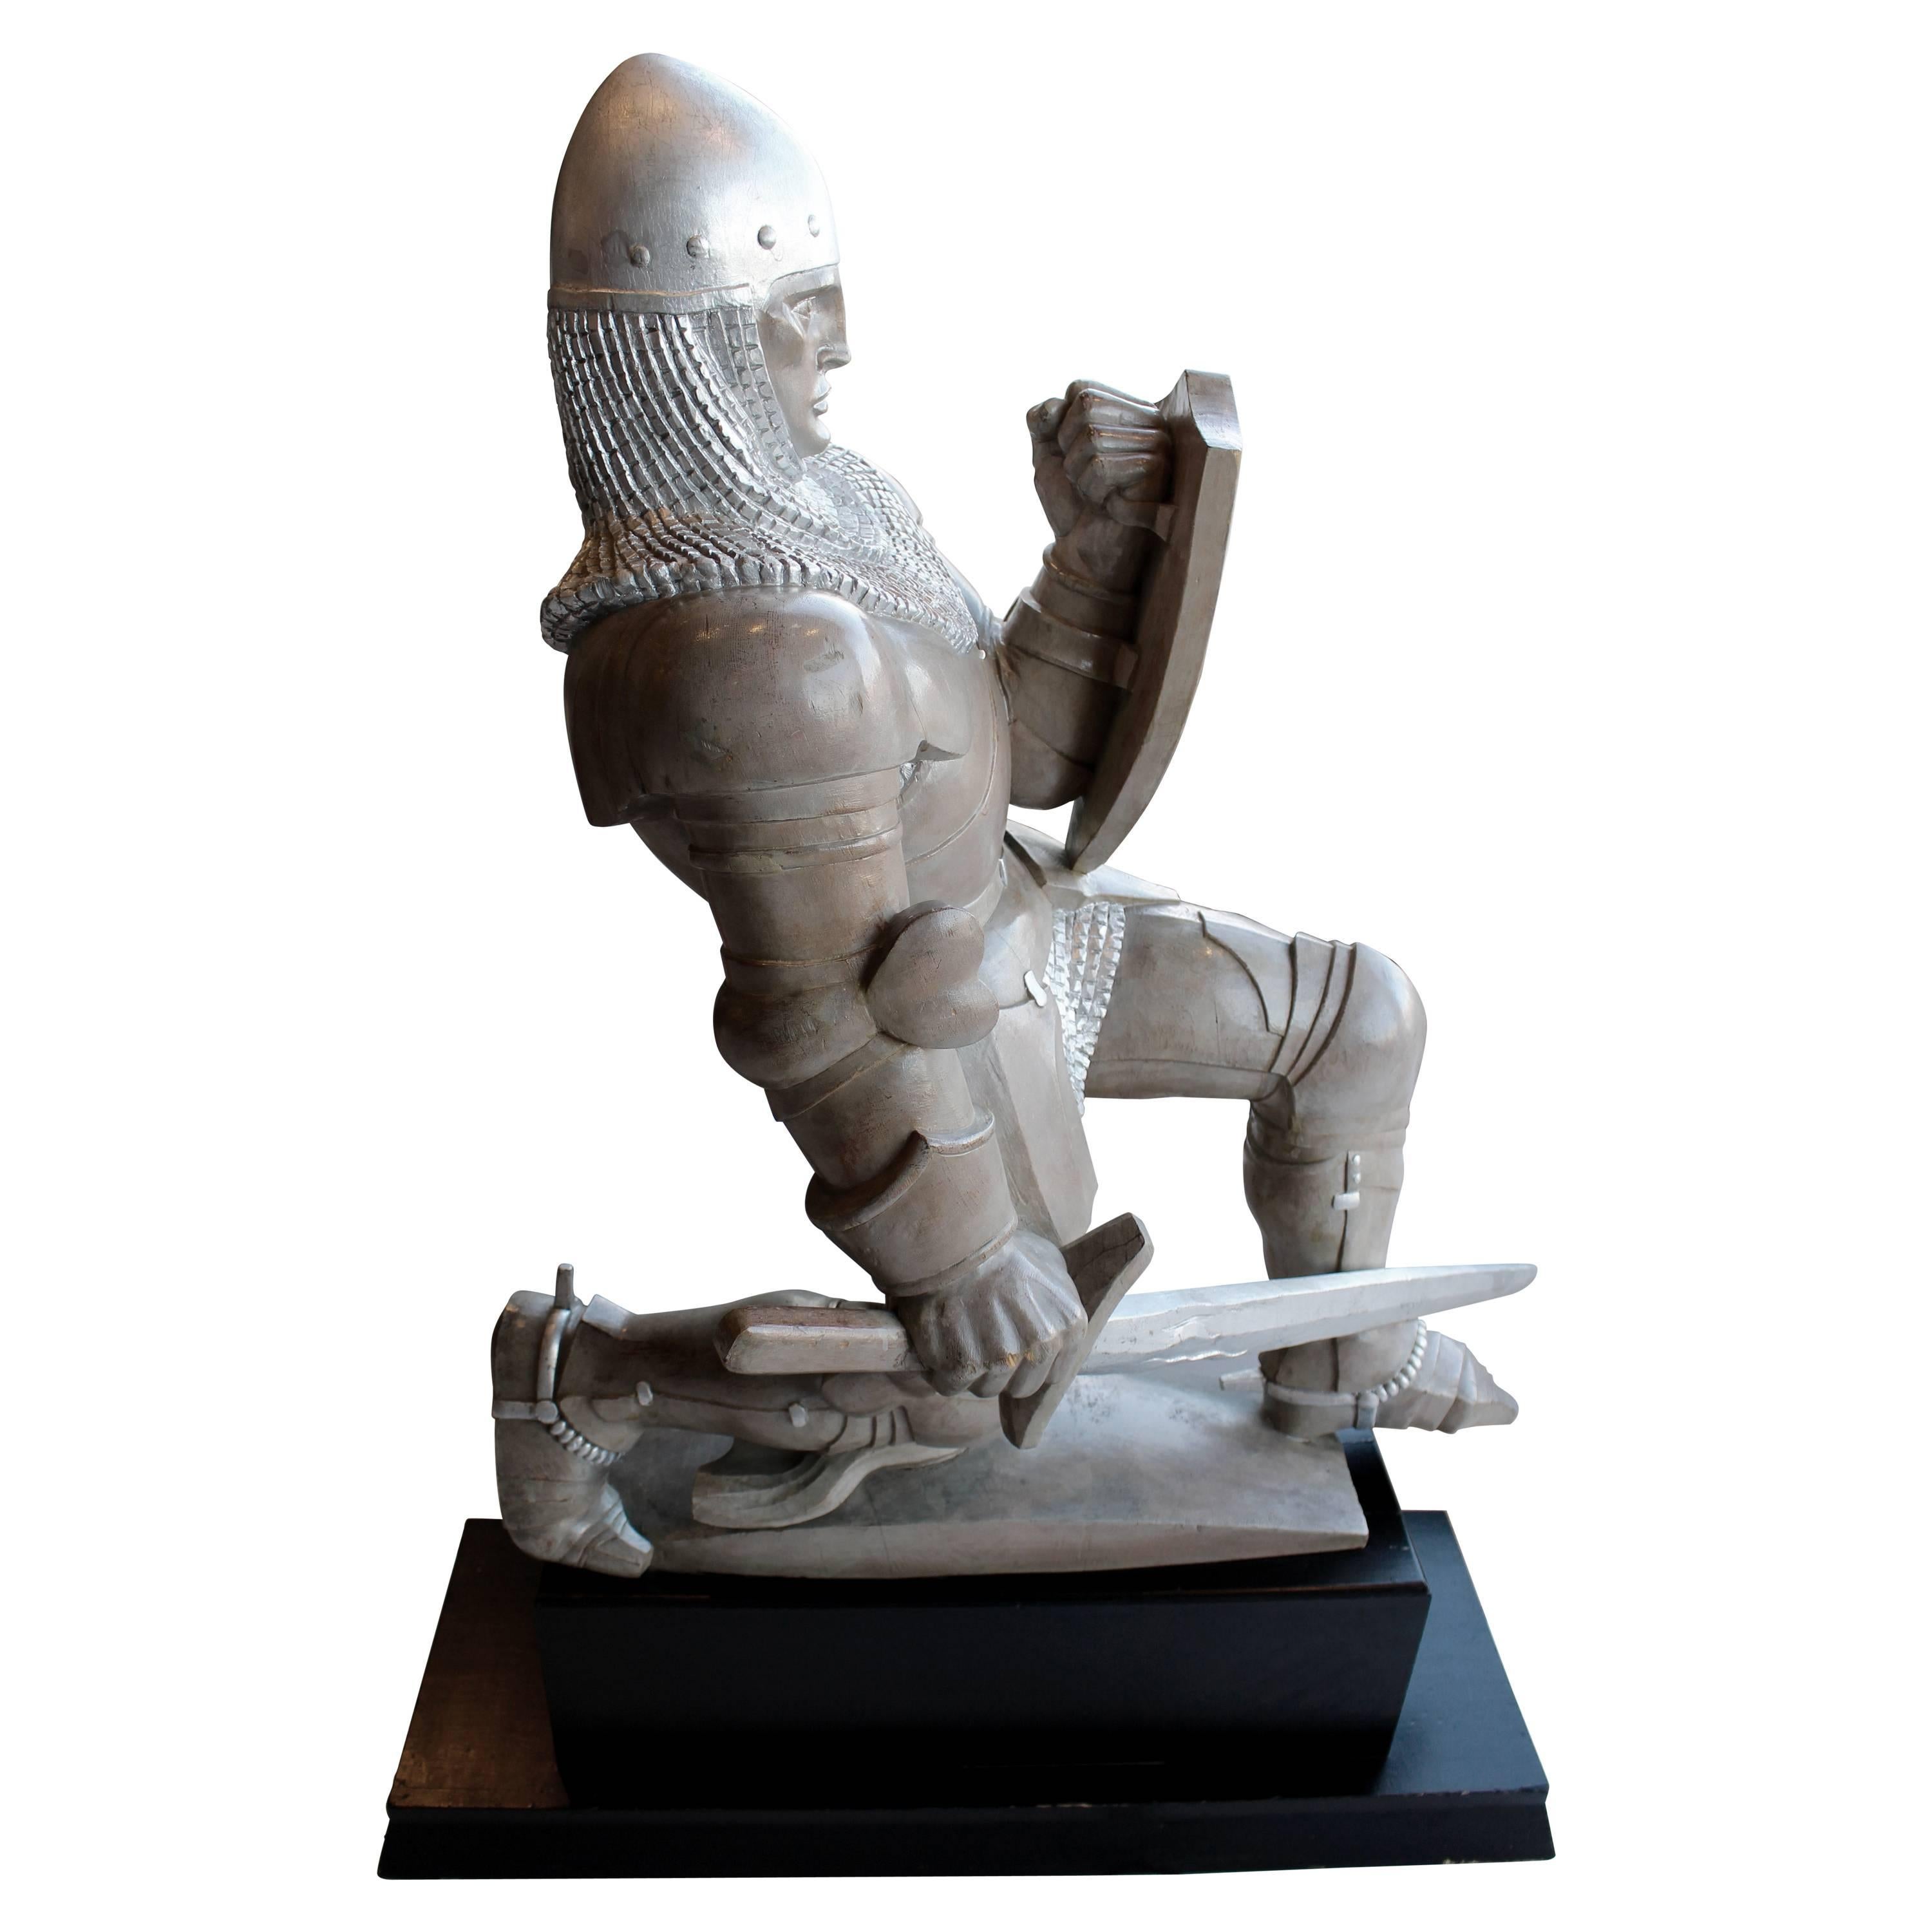 Painted and Carved Wooden Sculpture of a Knight Crusader, circa 1944 on Pedestal